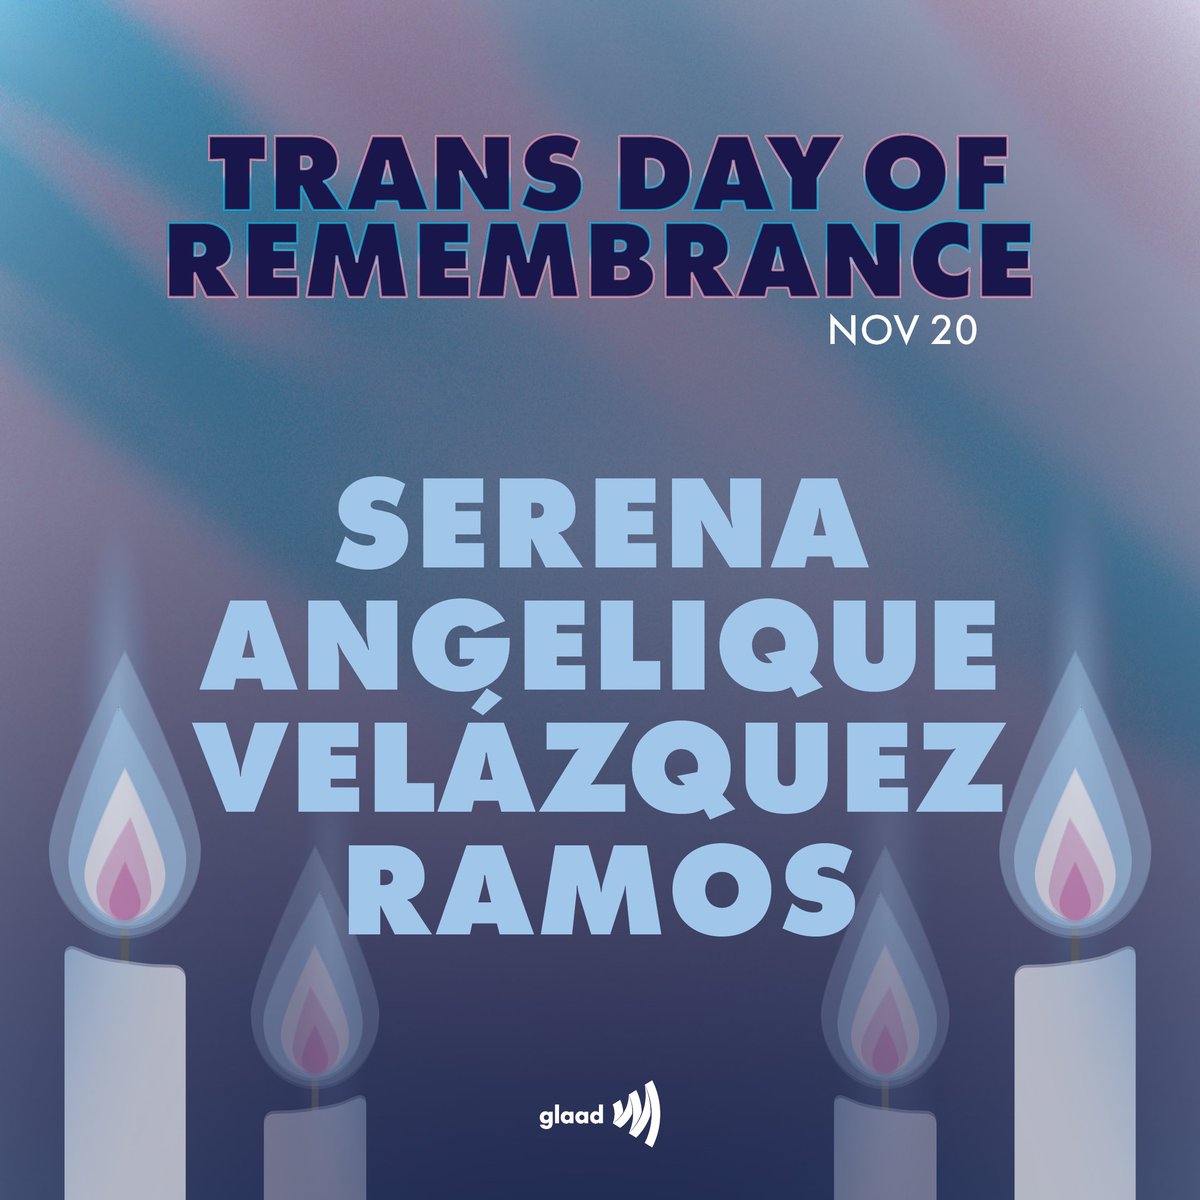 Serena Angelique Velázquez Ramos, a transgender woman, was killed in Puerto Rico on April 21, 2020. She was killed alongside Layla Pelaez Sánchez. She was 32 years old. She is remembered for being “full of life” and “a sincere friend.”